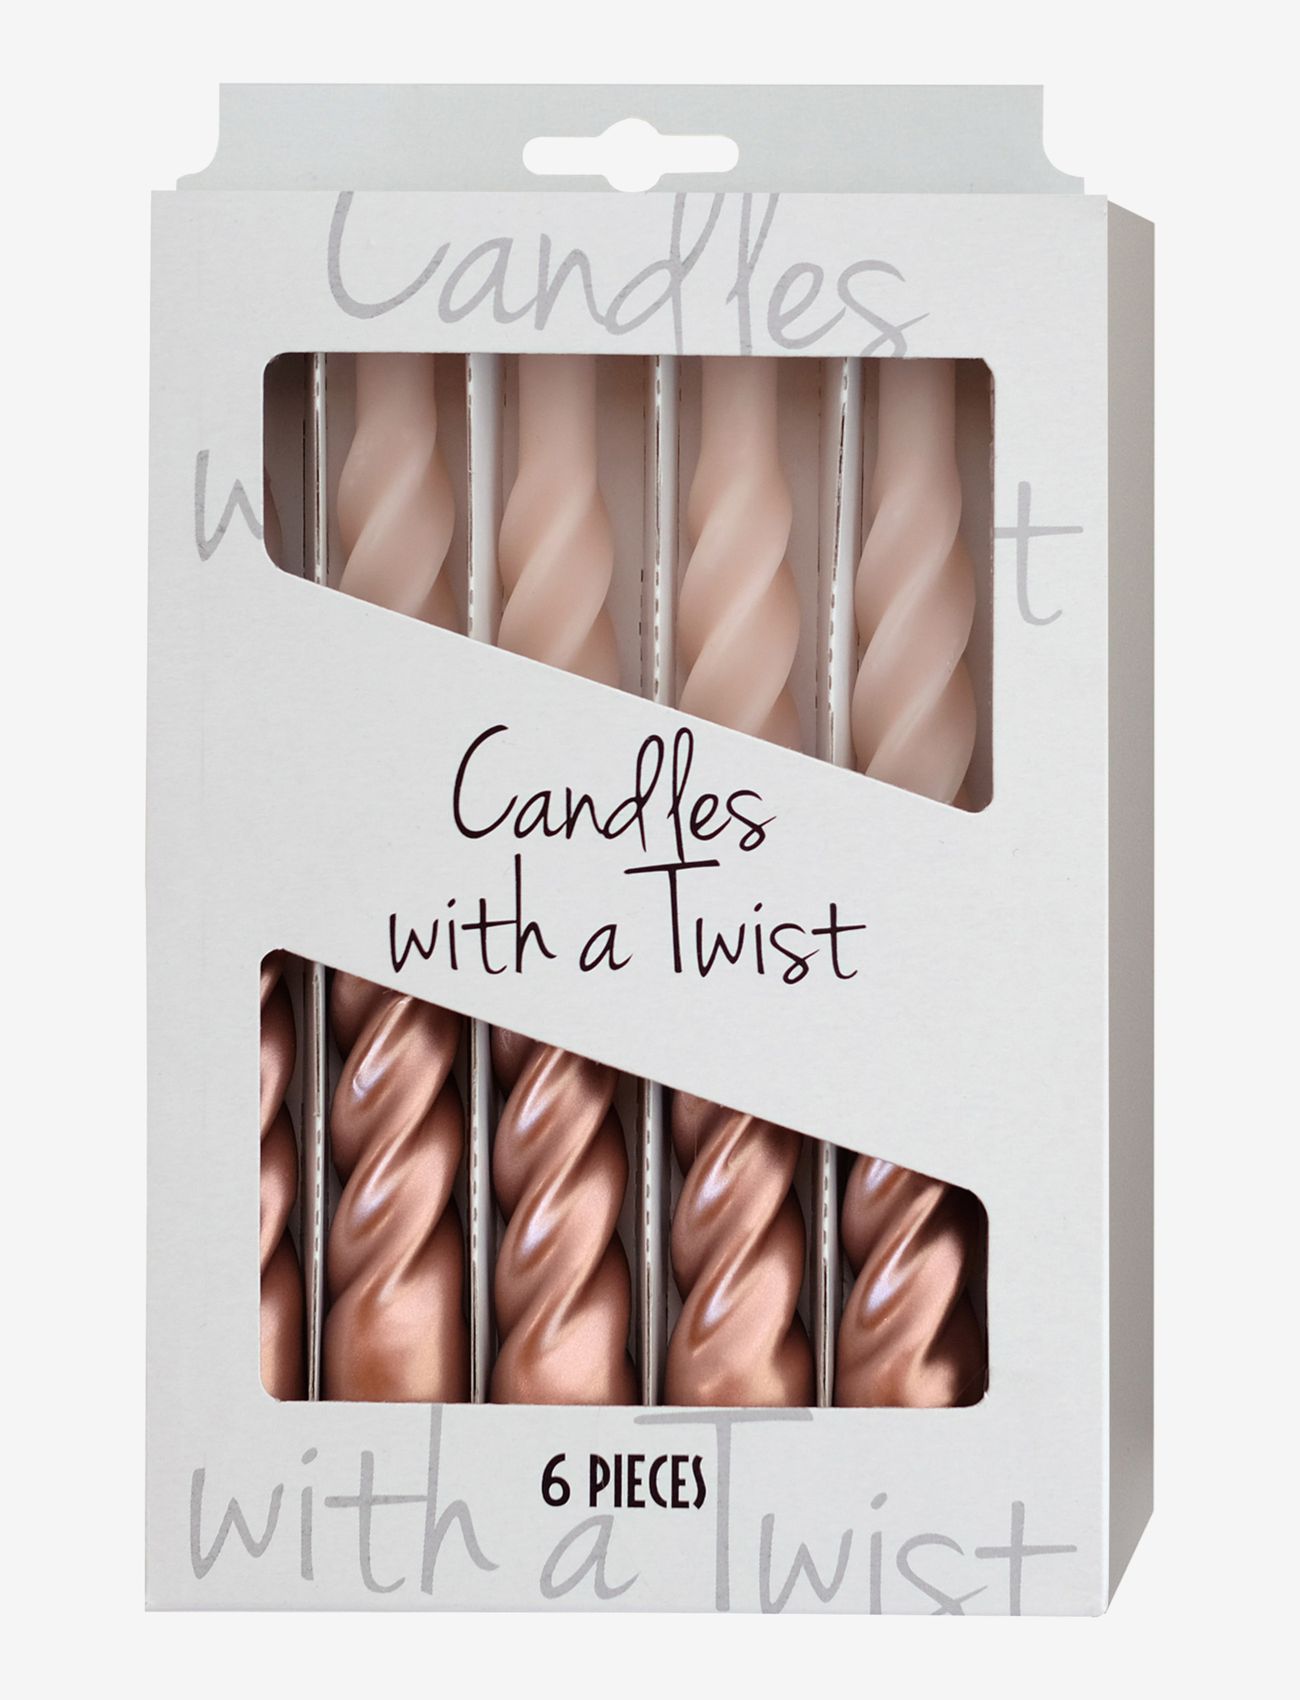 Kunstindustrien - Candles with a Twist - Multi-colored - de laveste prisene - rose and rose gold - 1